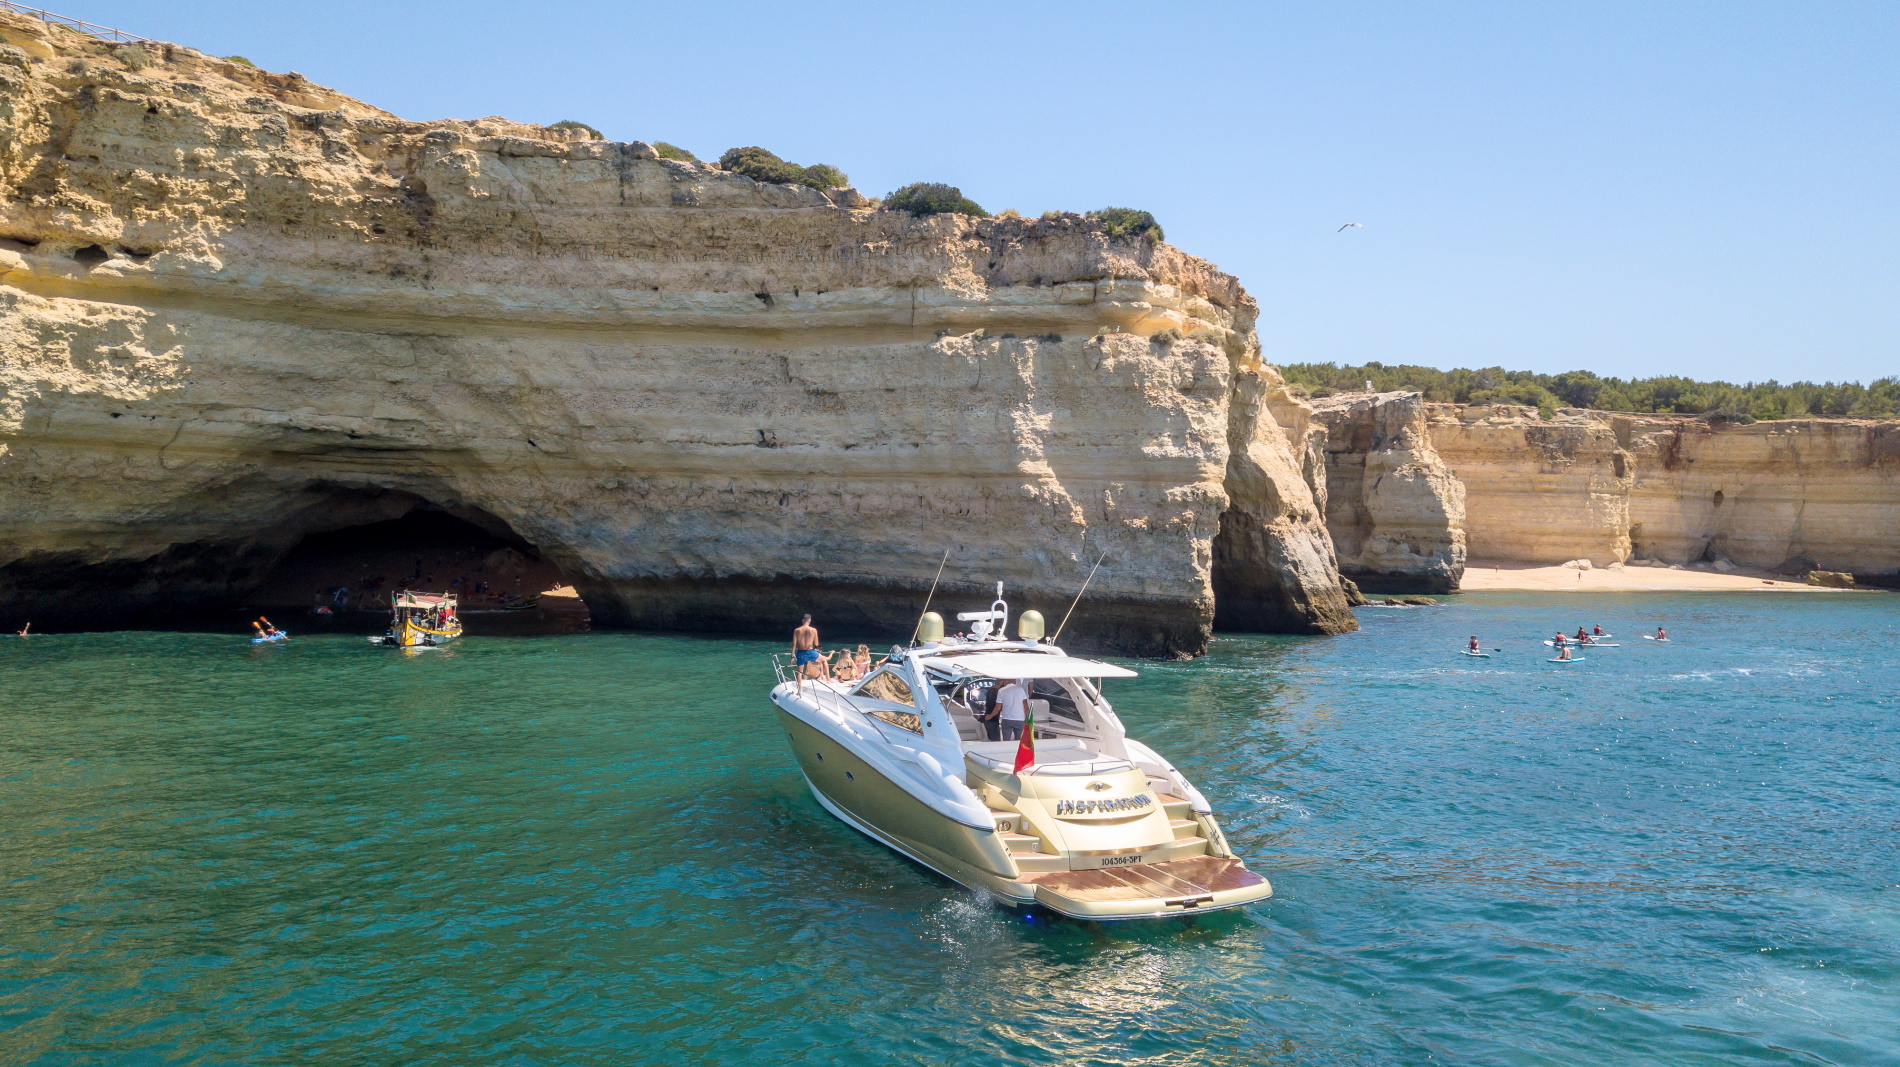 It's an unforgettable experience on your yacht in Albufeira